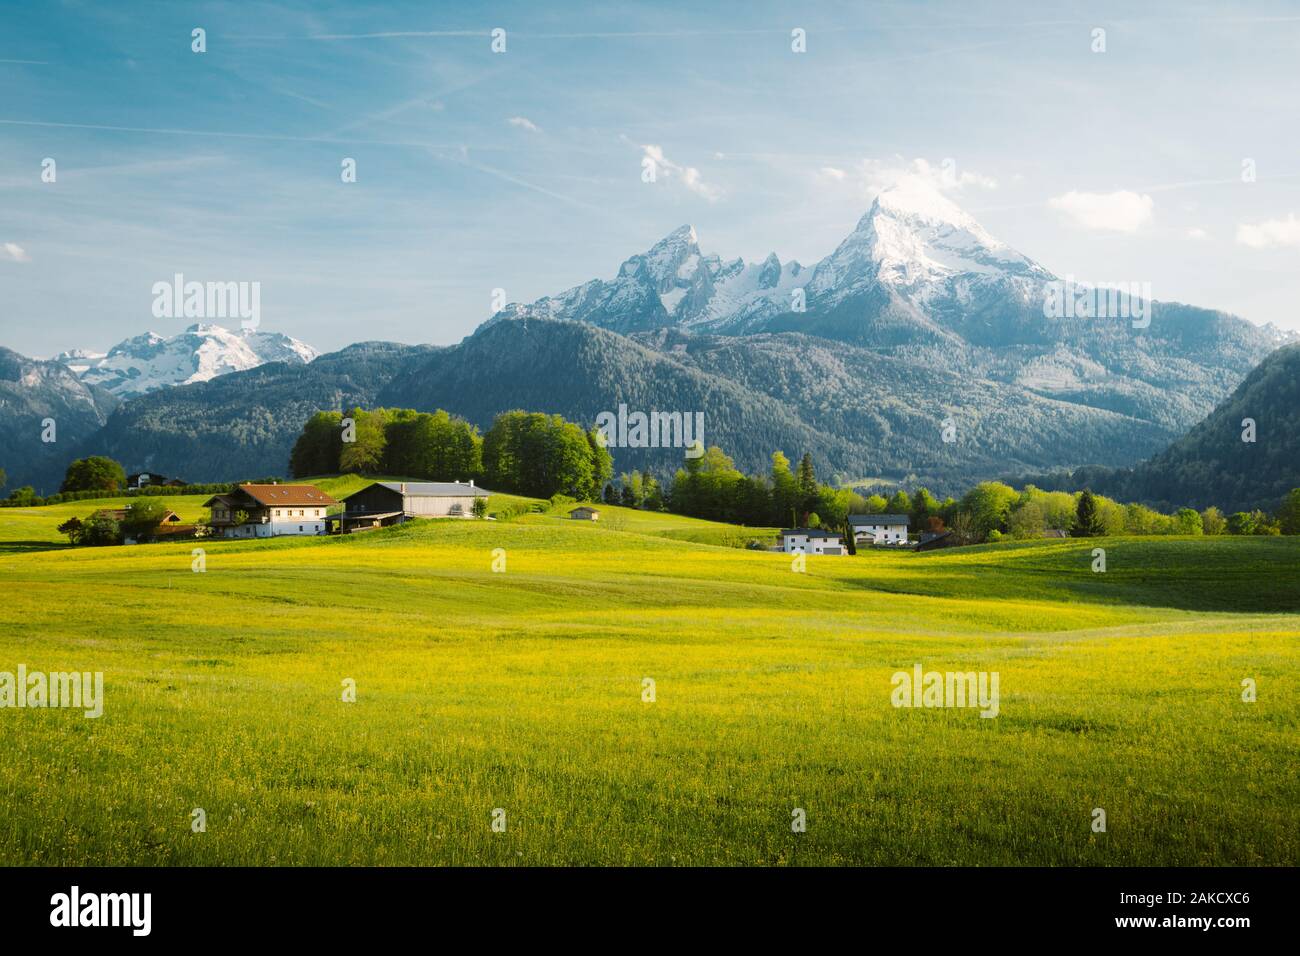 Beautiful view of idyllic alpine mountain scenery with blooming meadows and snowcapped mountain peaks on a beautiful sunny day with blue sky in spring Stock Photo